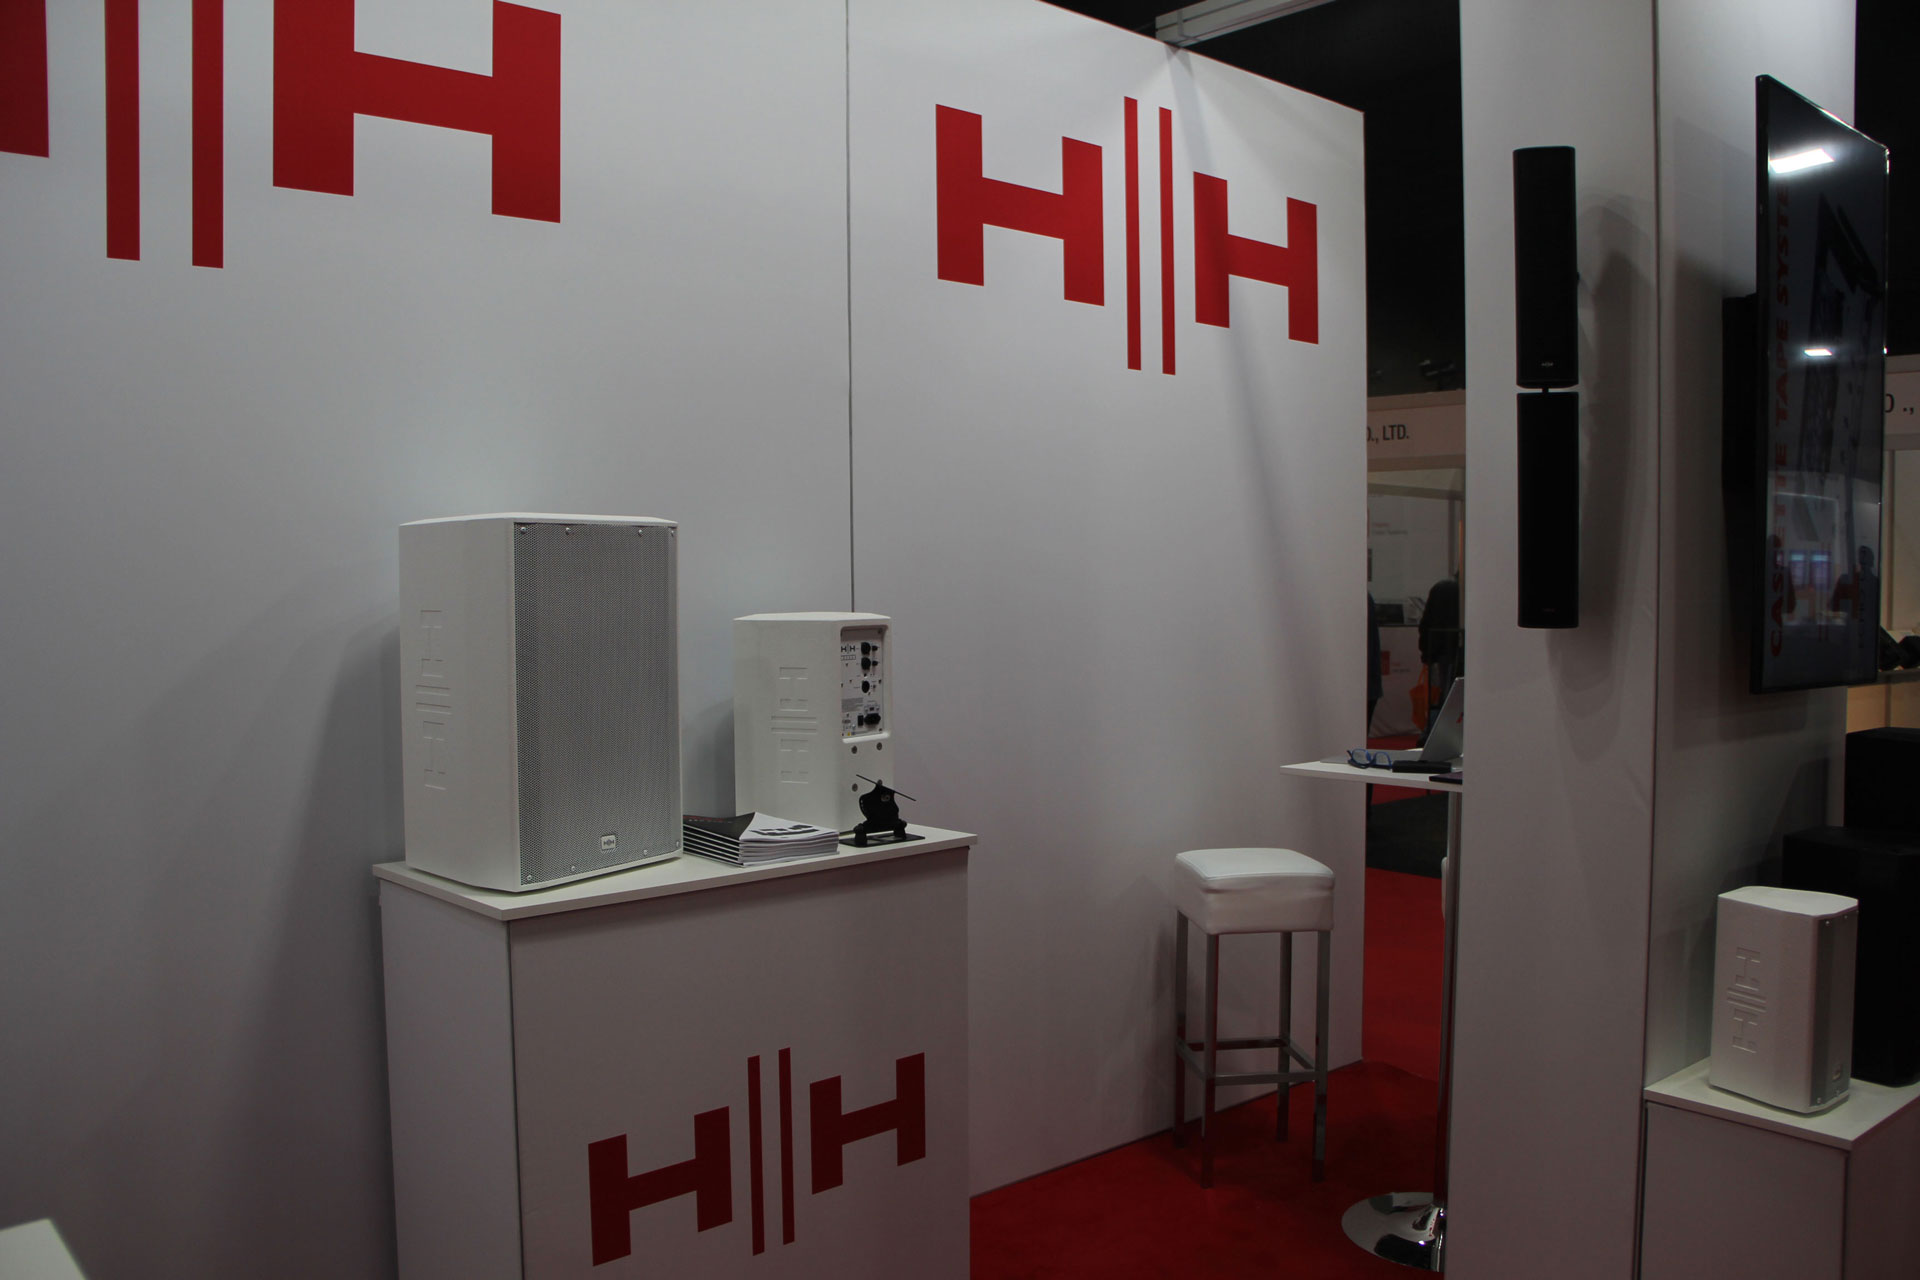 OneBigStar ISE HH Electronics Exhibition Stand Design & Build